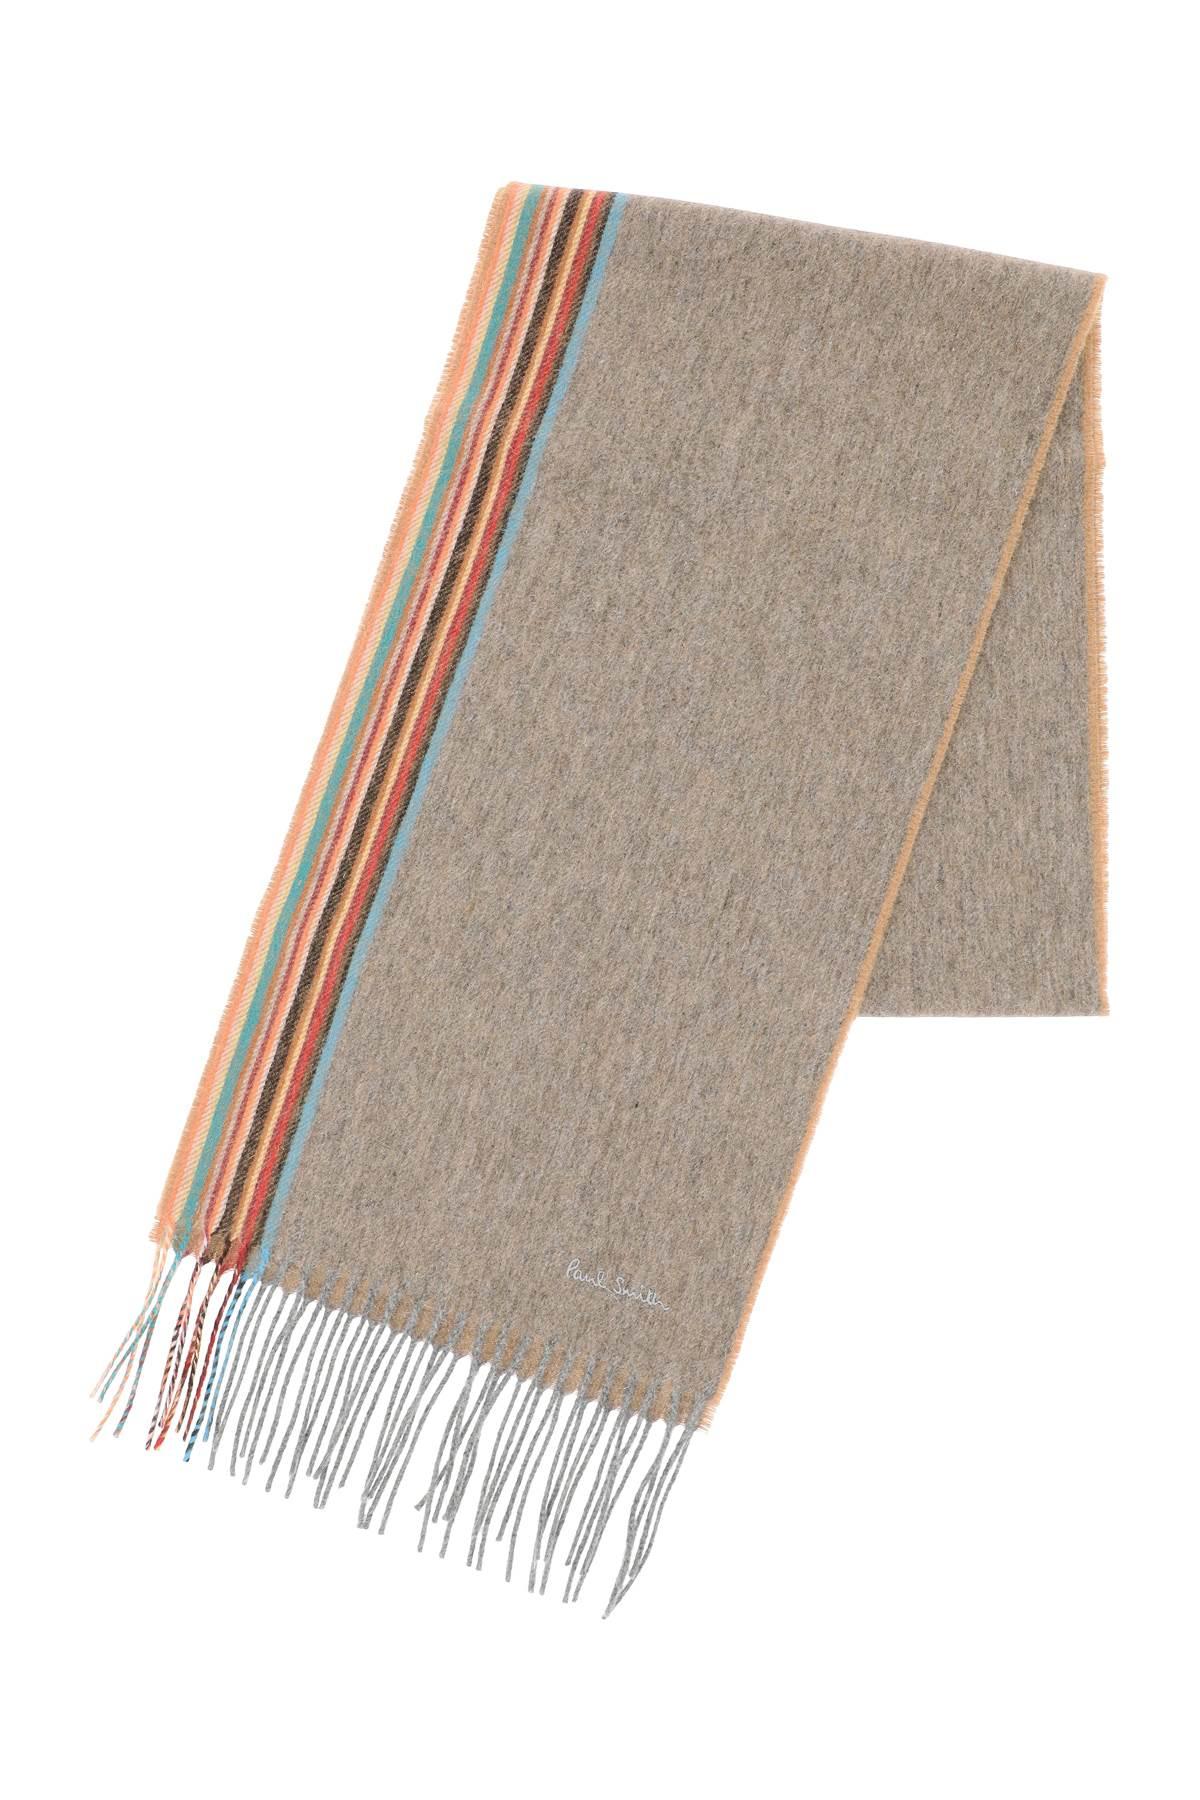 Paul Smith Two Tone Signature Stripe Scarf in Natural for Men | Lyst